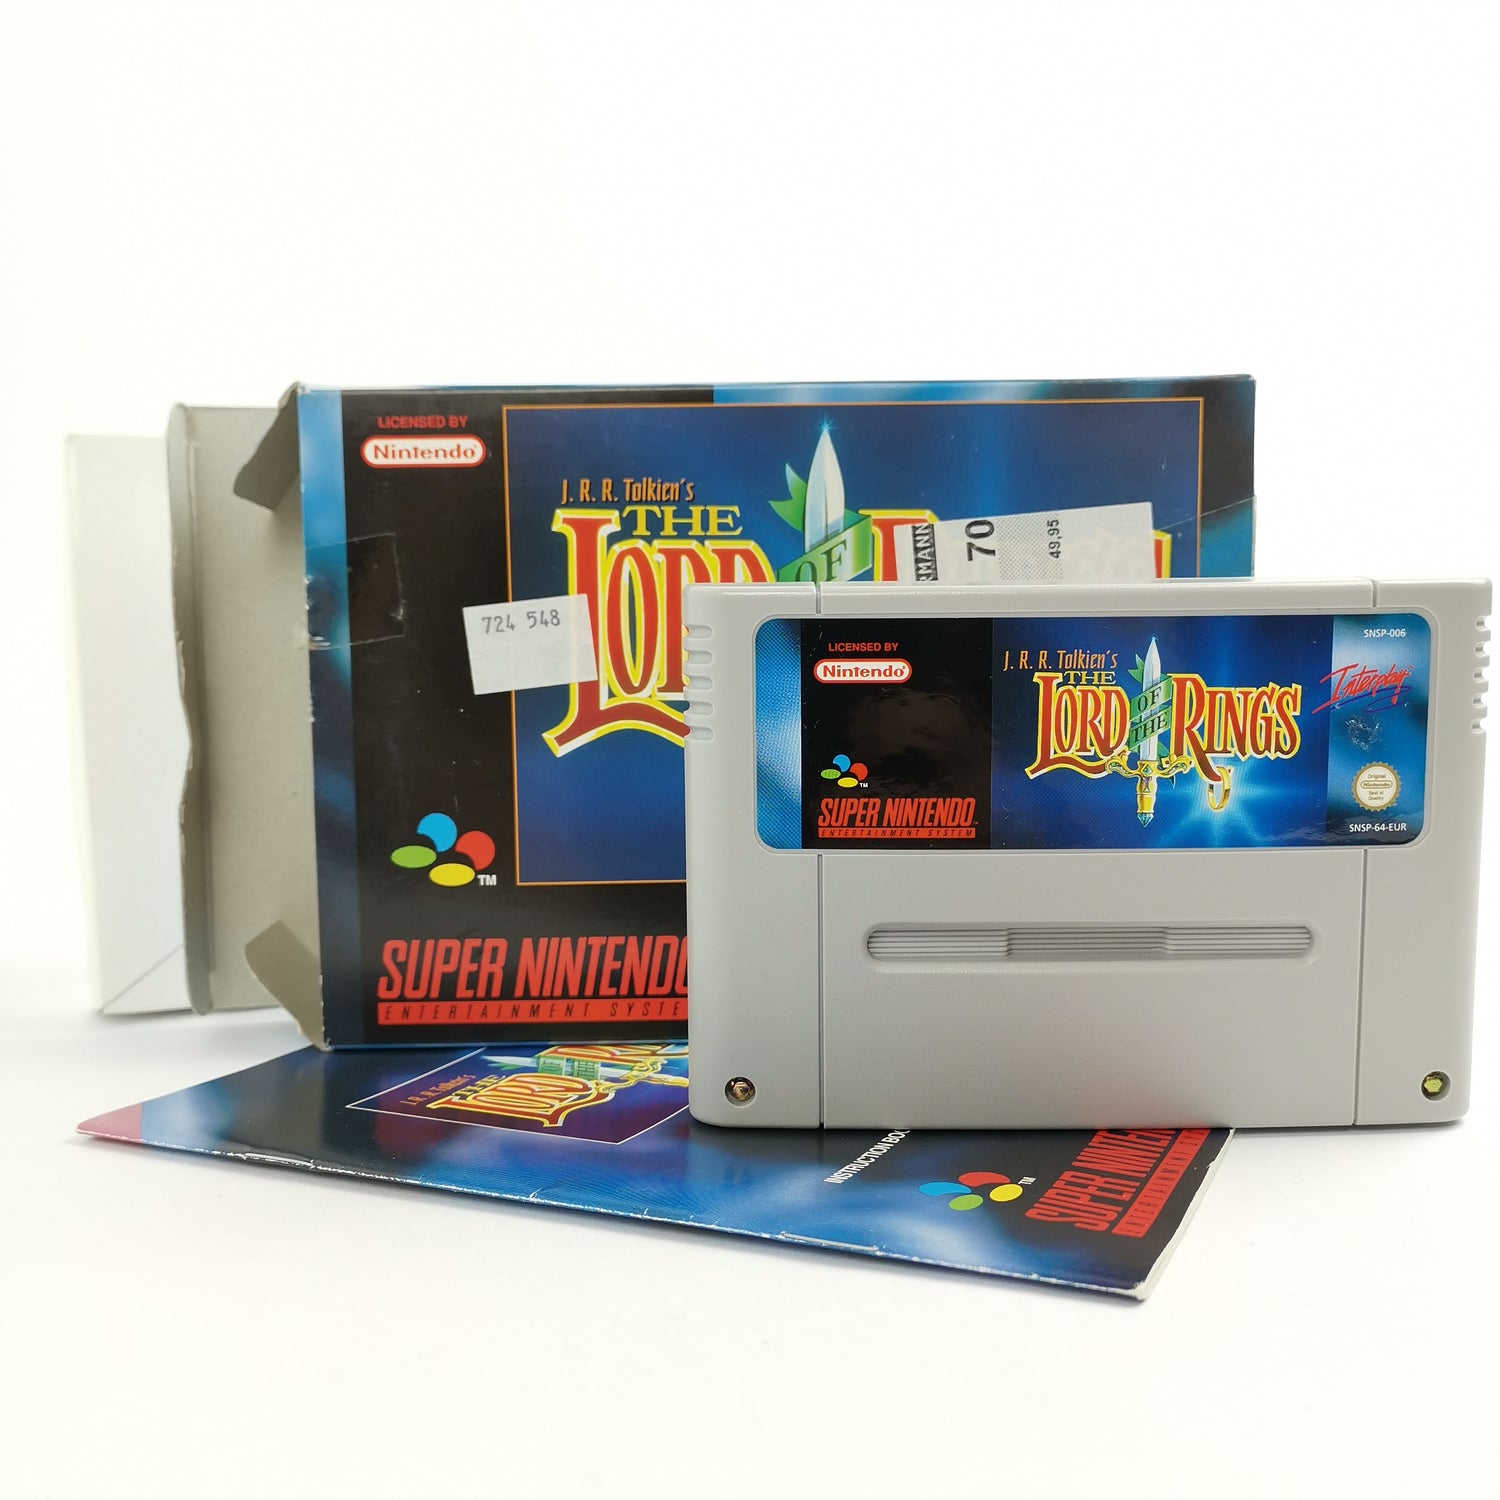 Super Nintendo Game: The Lord of the Rings JRR | SNES OVP - PAL Version EUR